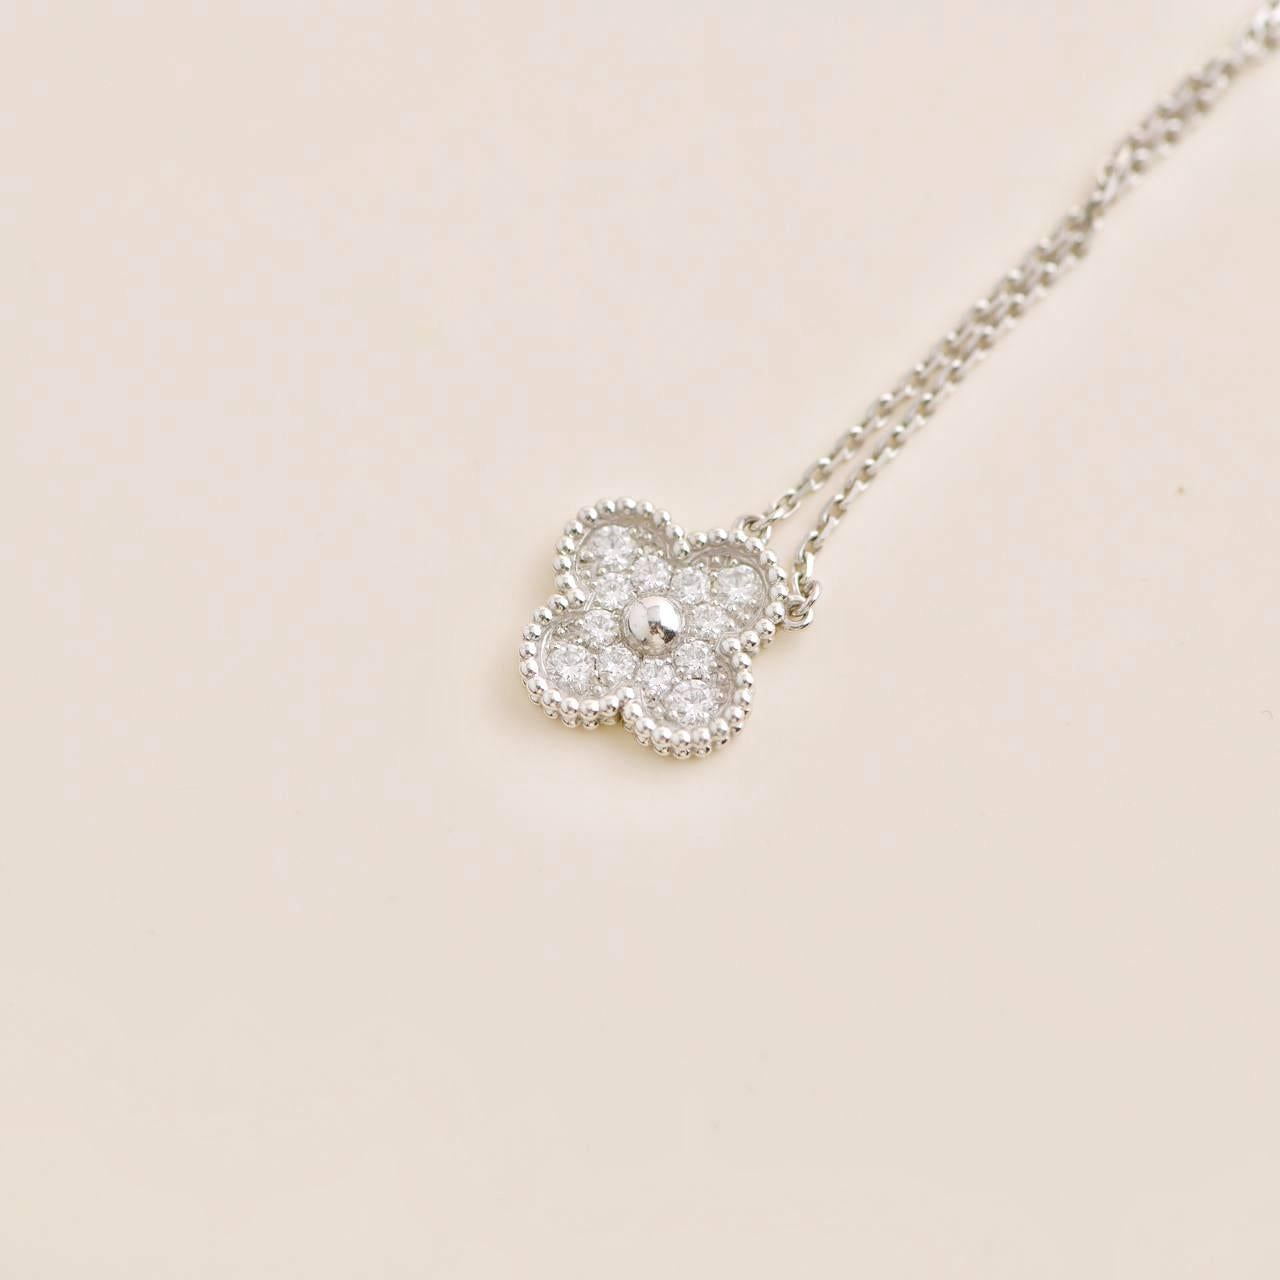 Van Cleef & Arpels Vintage Alhambra White Gold Diamond Paved Pendant Necklace In Excellent Condition For Sale In Banbury, GB